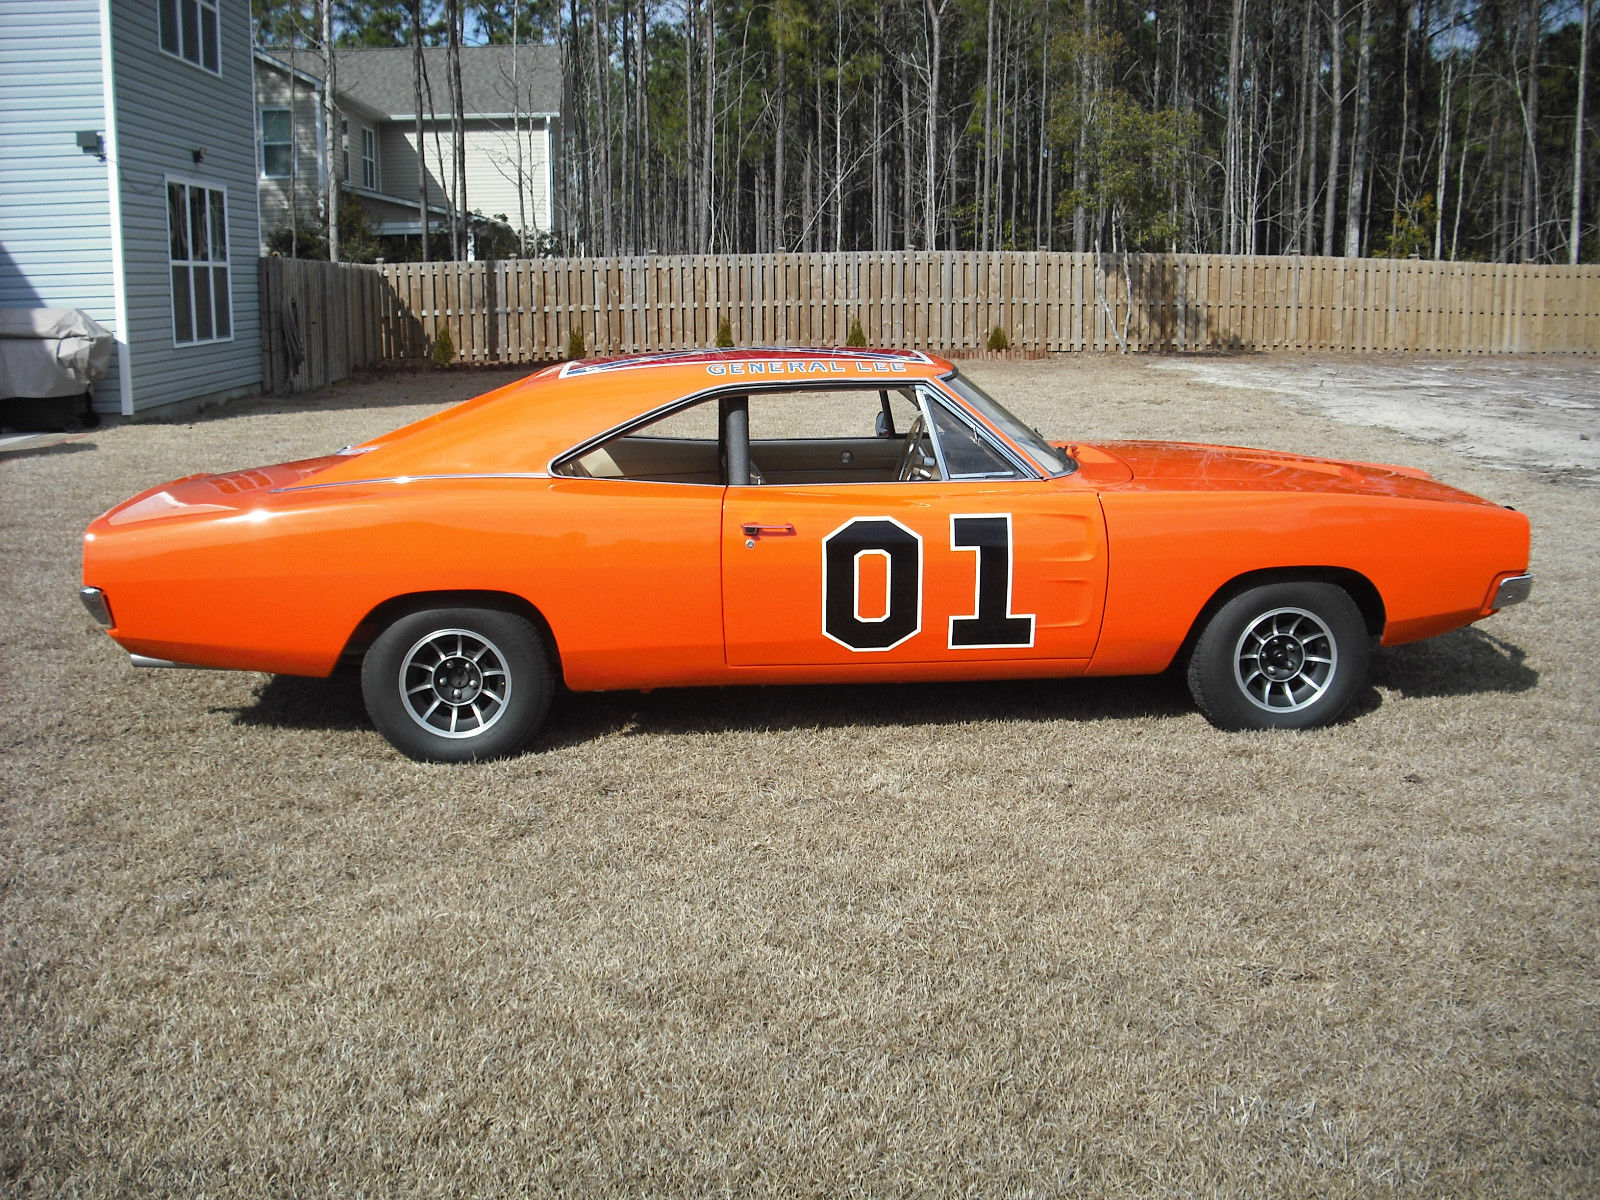 BangShift.com There is a pristine General Lee for sale on eBay